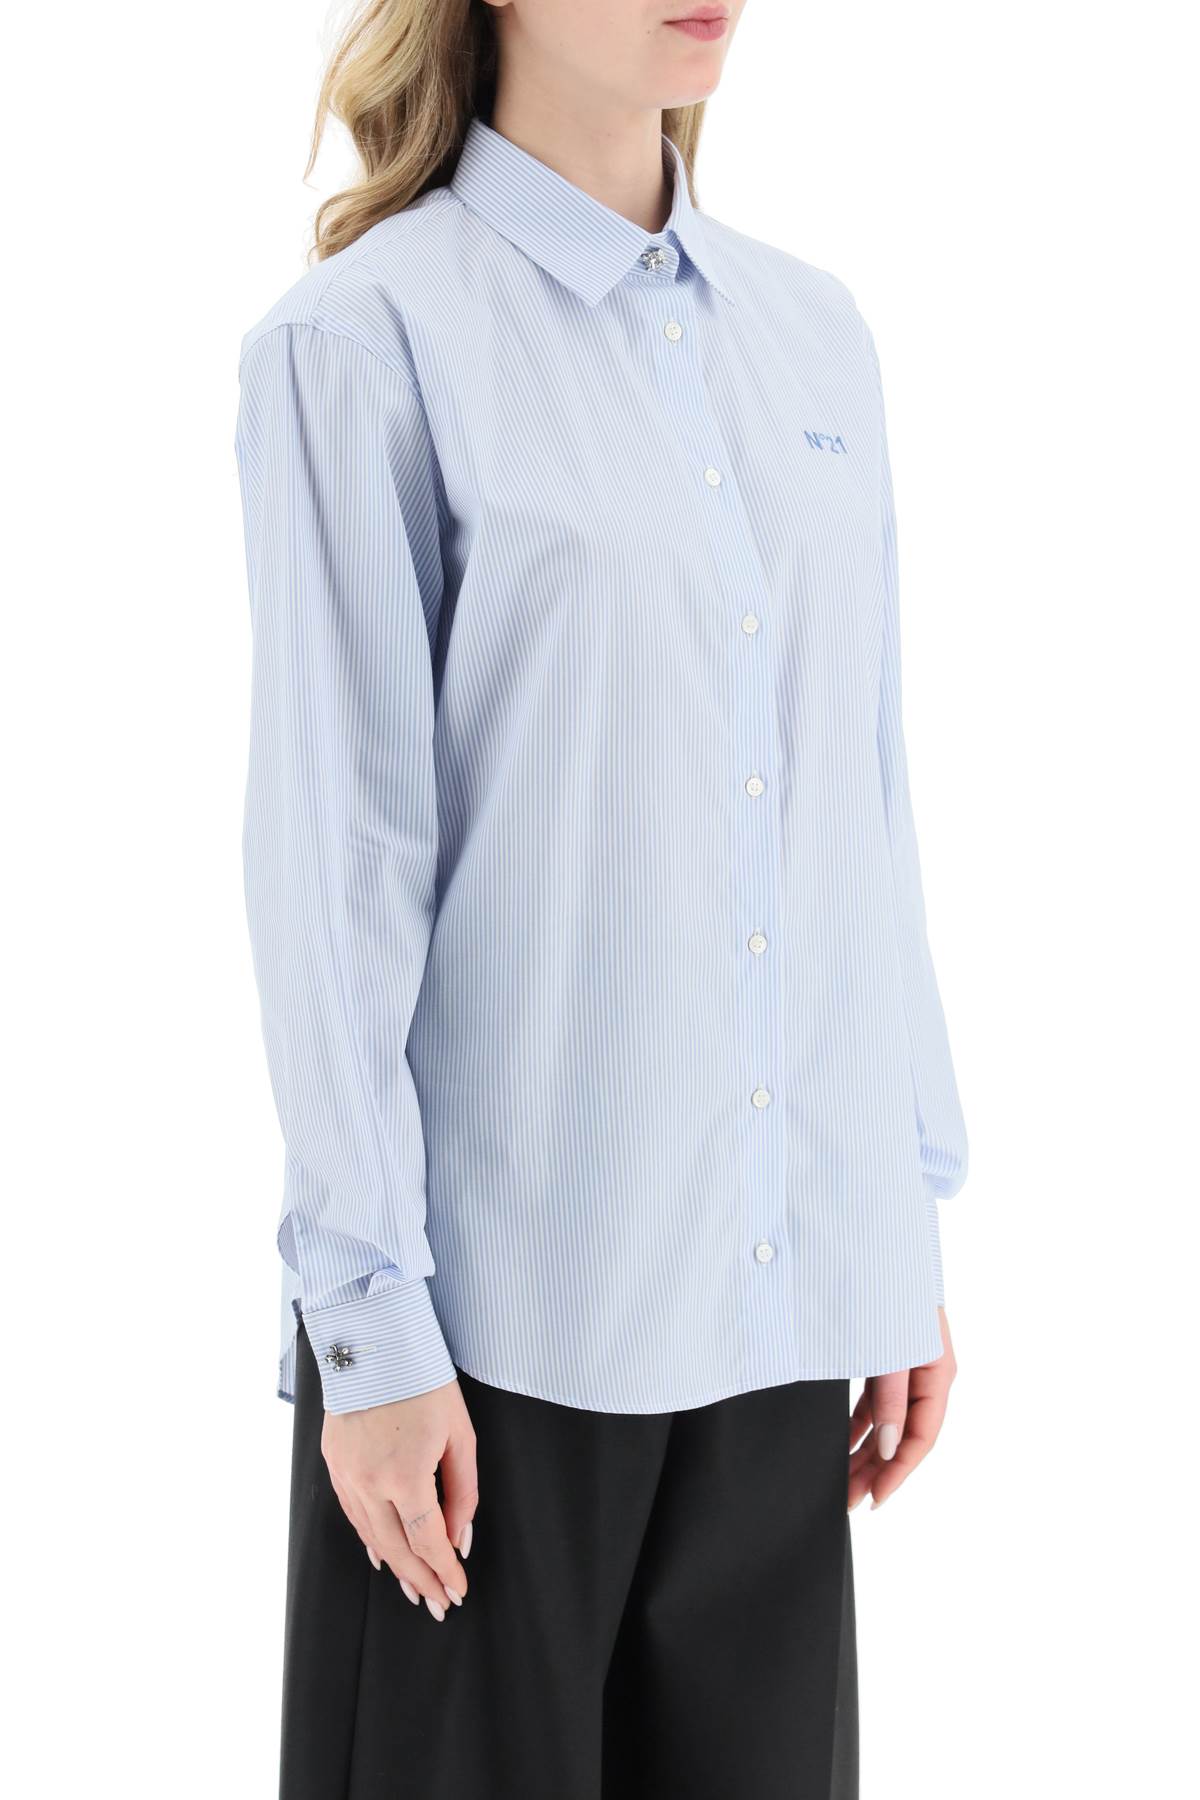 Shop N°21 Striped Shirt With Jewel Buttons In Rigato Bianco Azzurro (white)